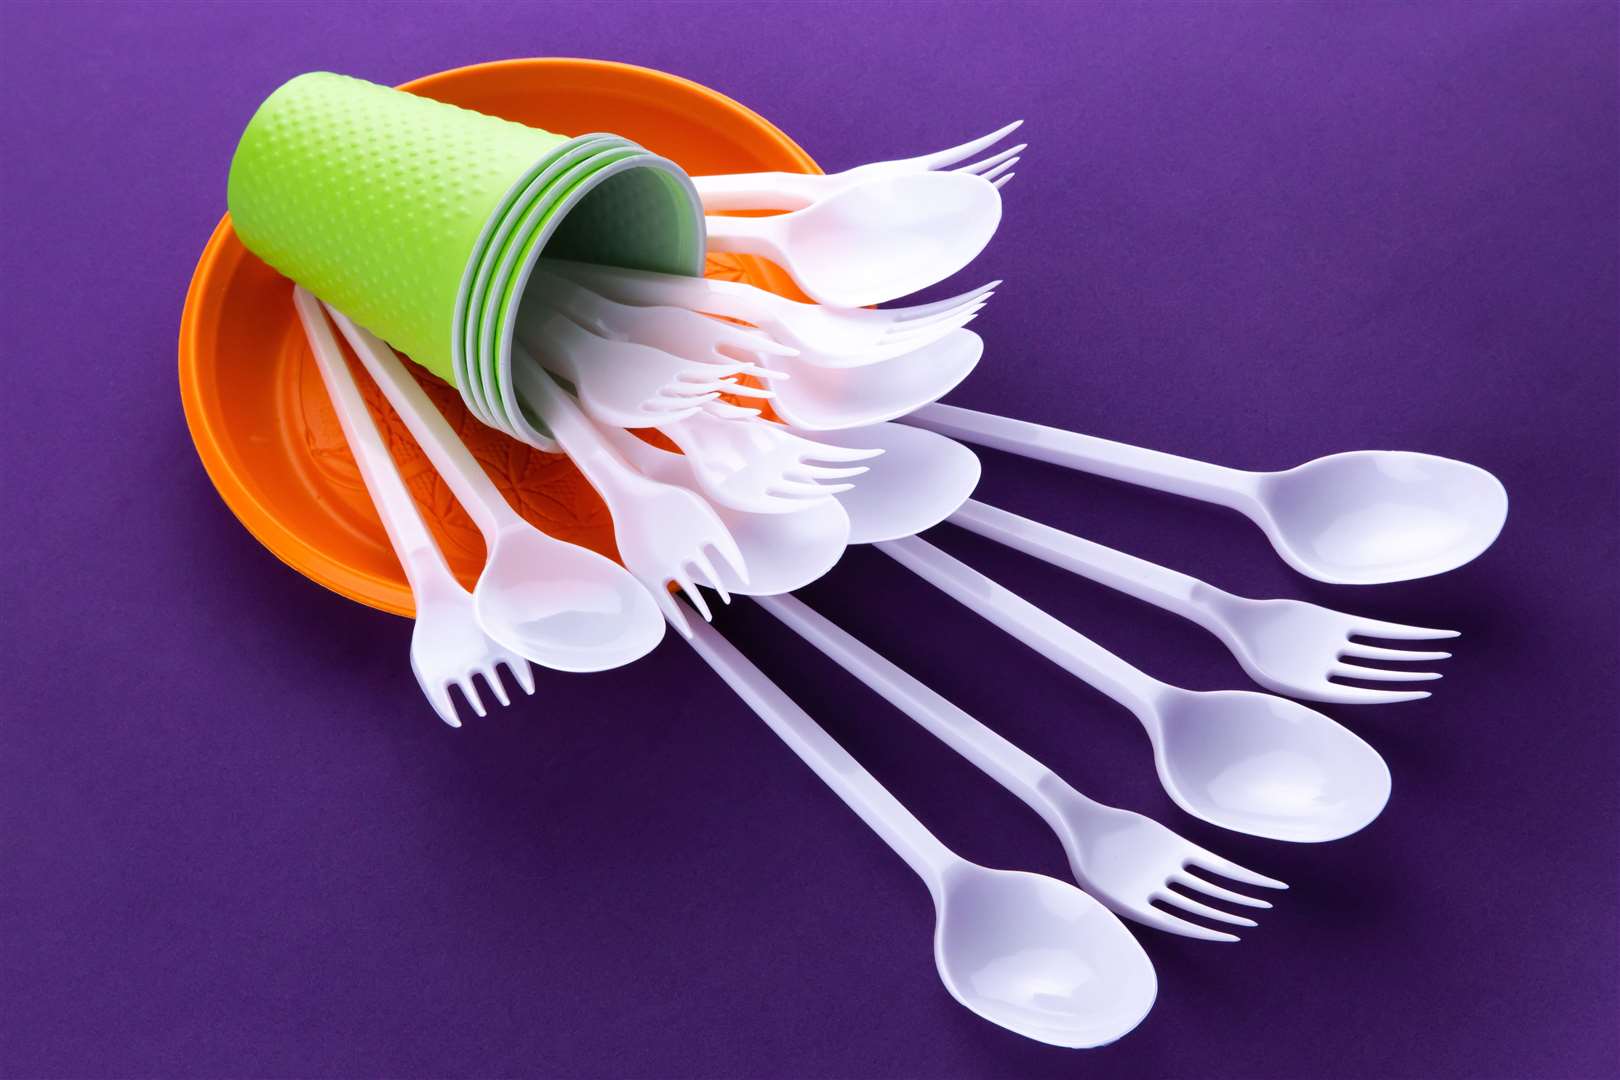 Single use plastic cutlery is set to be banned.